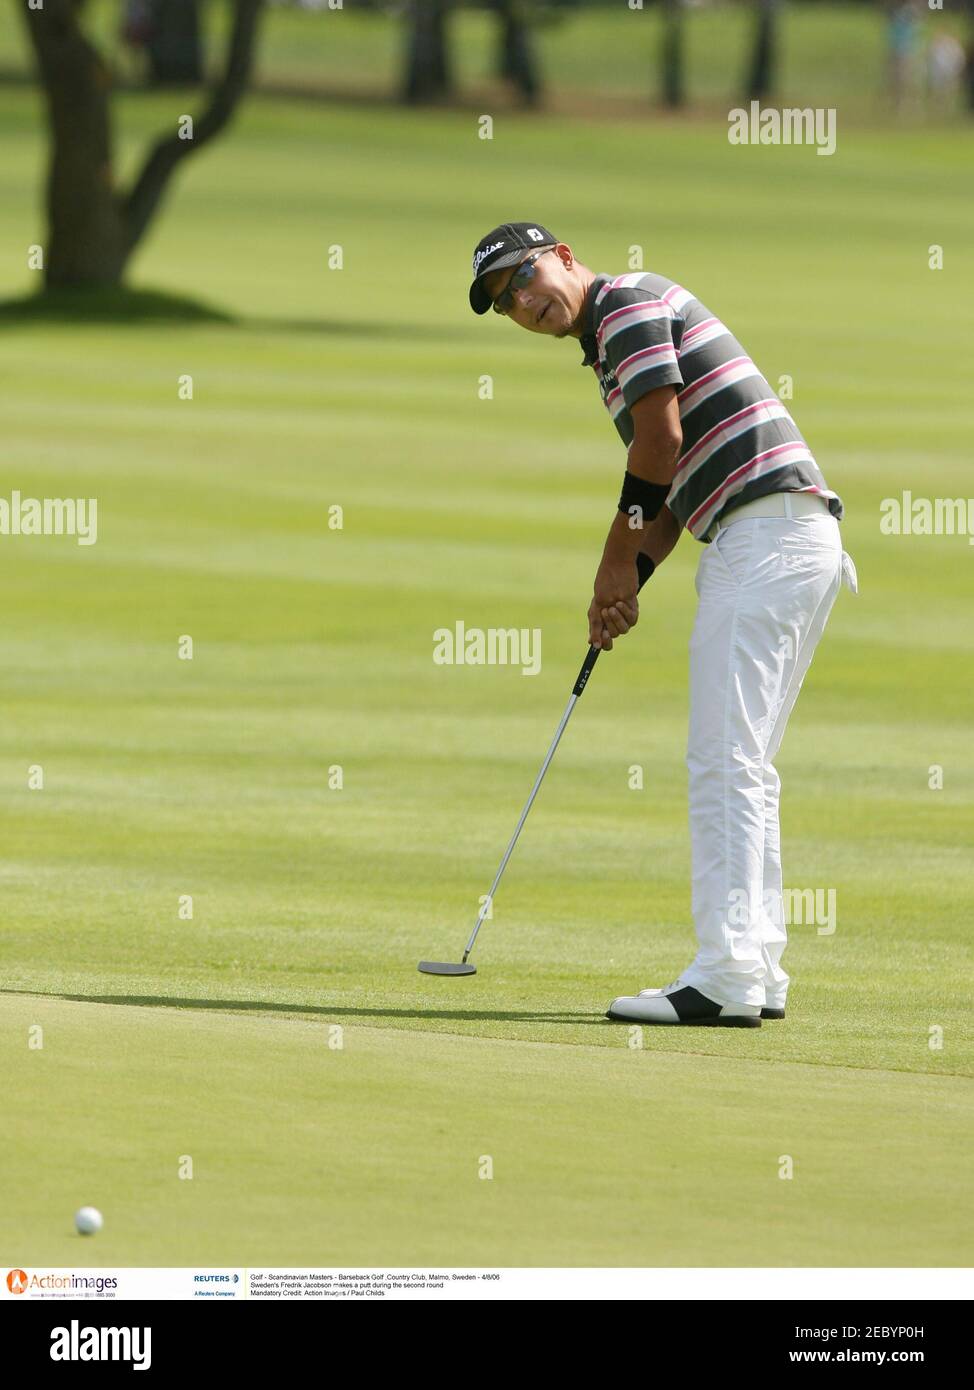 Golf - Scandinavian Masters - Barseback Golf & Country Club, Malmo, Sweden  - 4/8/06 Sweden's Fredrik Jacobson makes a putt during the second round  Mandatory Credit: Action Images / Paul Childs Stock Photo - Alamy